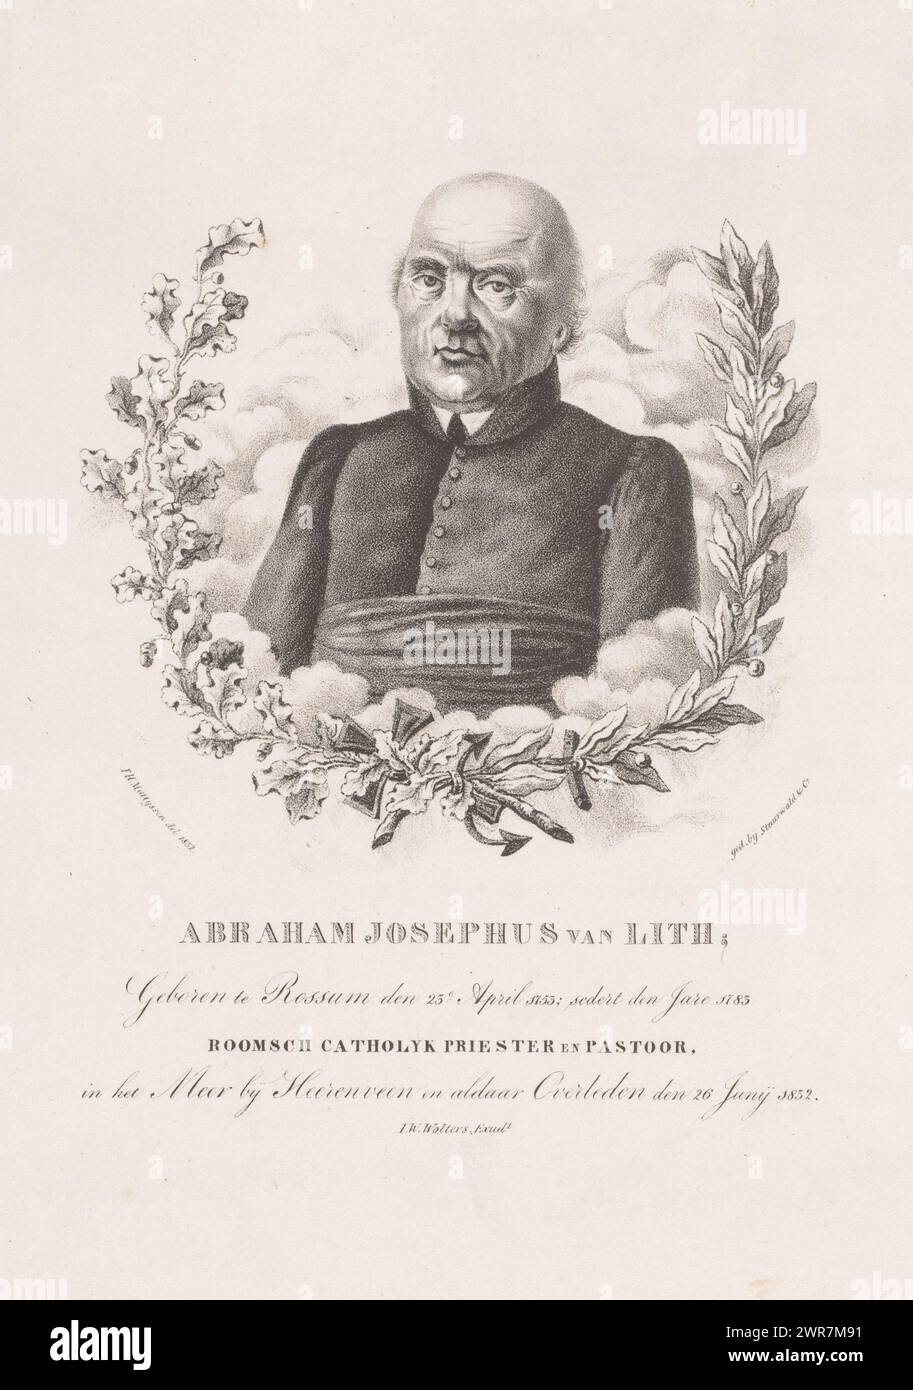 Portrait of Abraham Josephus van Lith, The sitter is depicted between the clouds and flanked by a wreath of oak leaves and laurel leaves, held together by a cross and an anchor. Below the portrait a four-line caption., print maker: Jan Hendrik Matthijssen, after design by: Jan Hendrik Matthijssen, printer: Steuerwald & Co., Dordrecht, 1832, paper, height 380 mm × width 270 mm, print Stock Photo